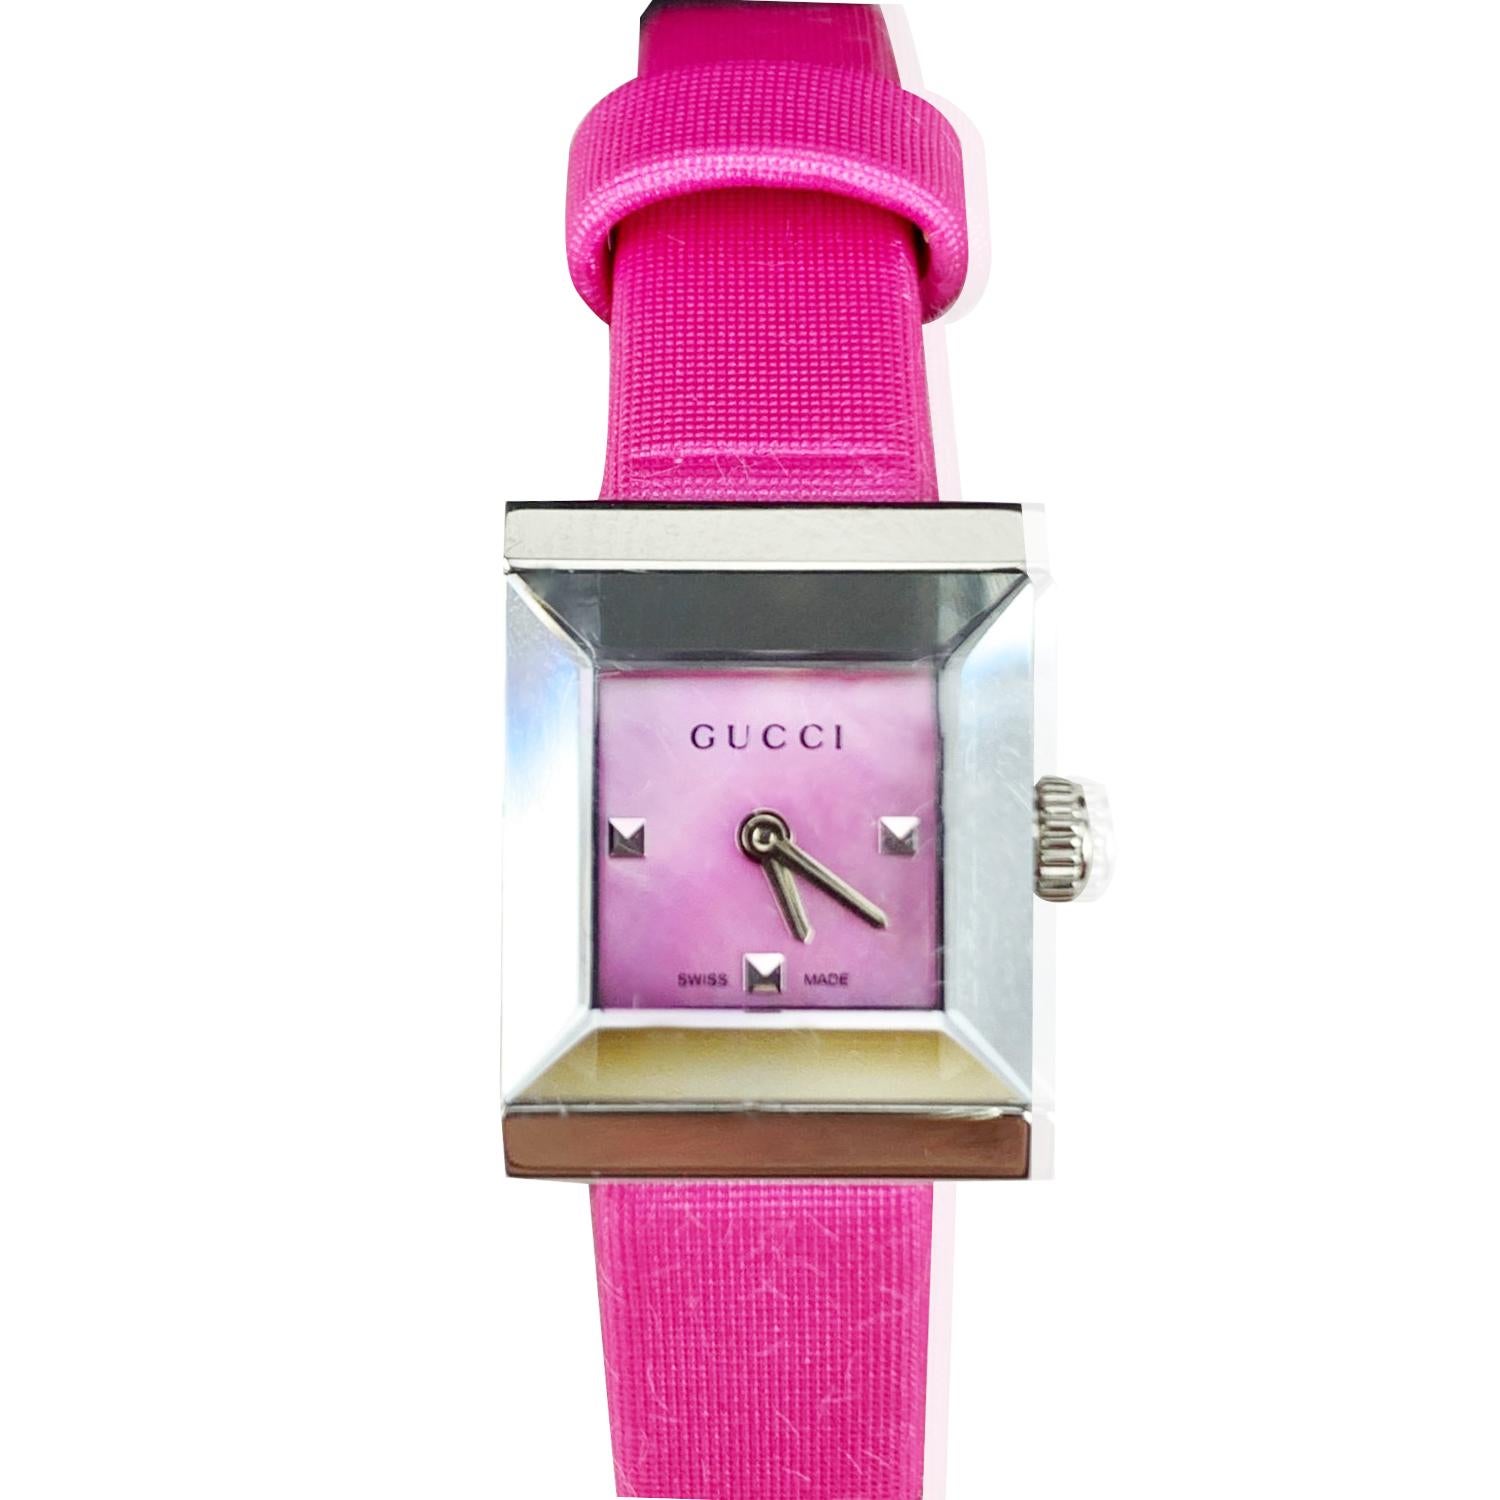 Beautiful wristwatch,mod. 128.5, by GUCCI. Small square-shaped stainless steel case with satin and leather adjustable wrist strap. Quartz movement. Sapphire crystal glass. Pink dial. Buckle closure. Total length: 7.75 inches - 19.6 cm. Max